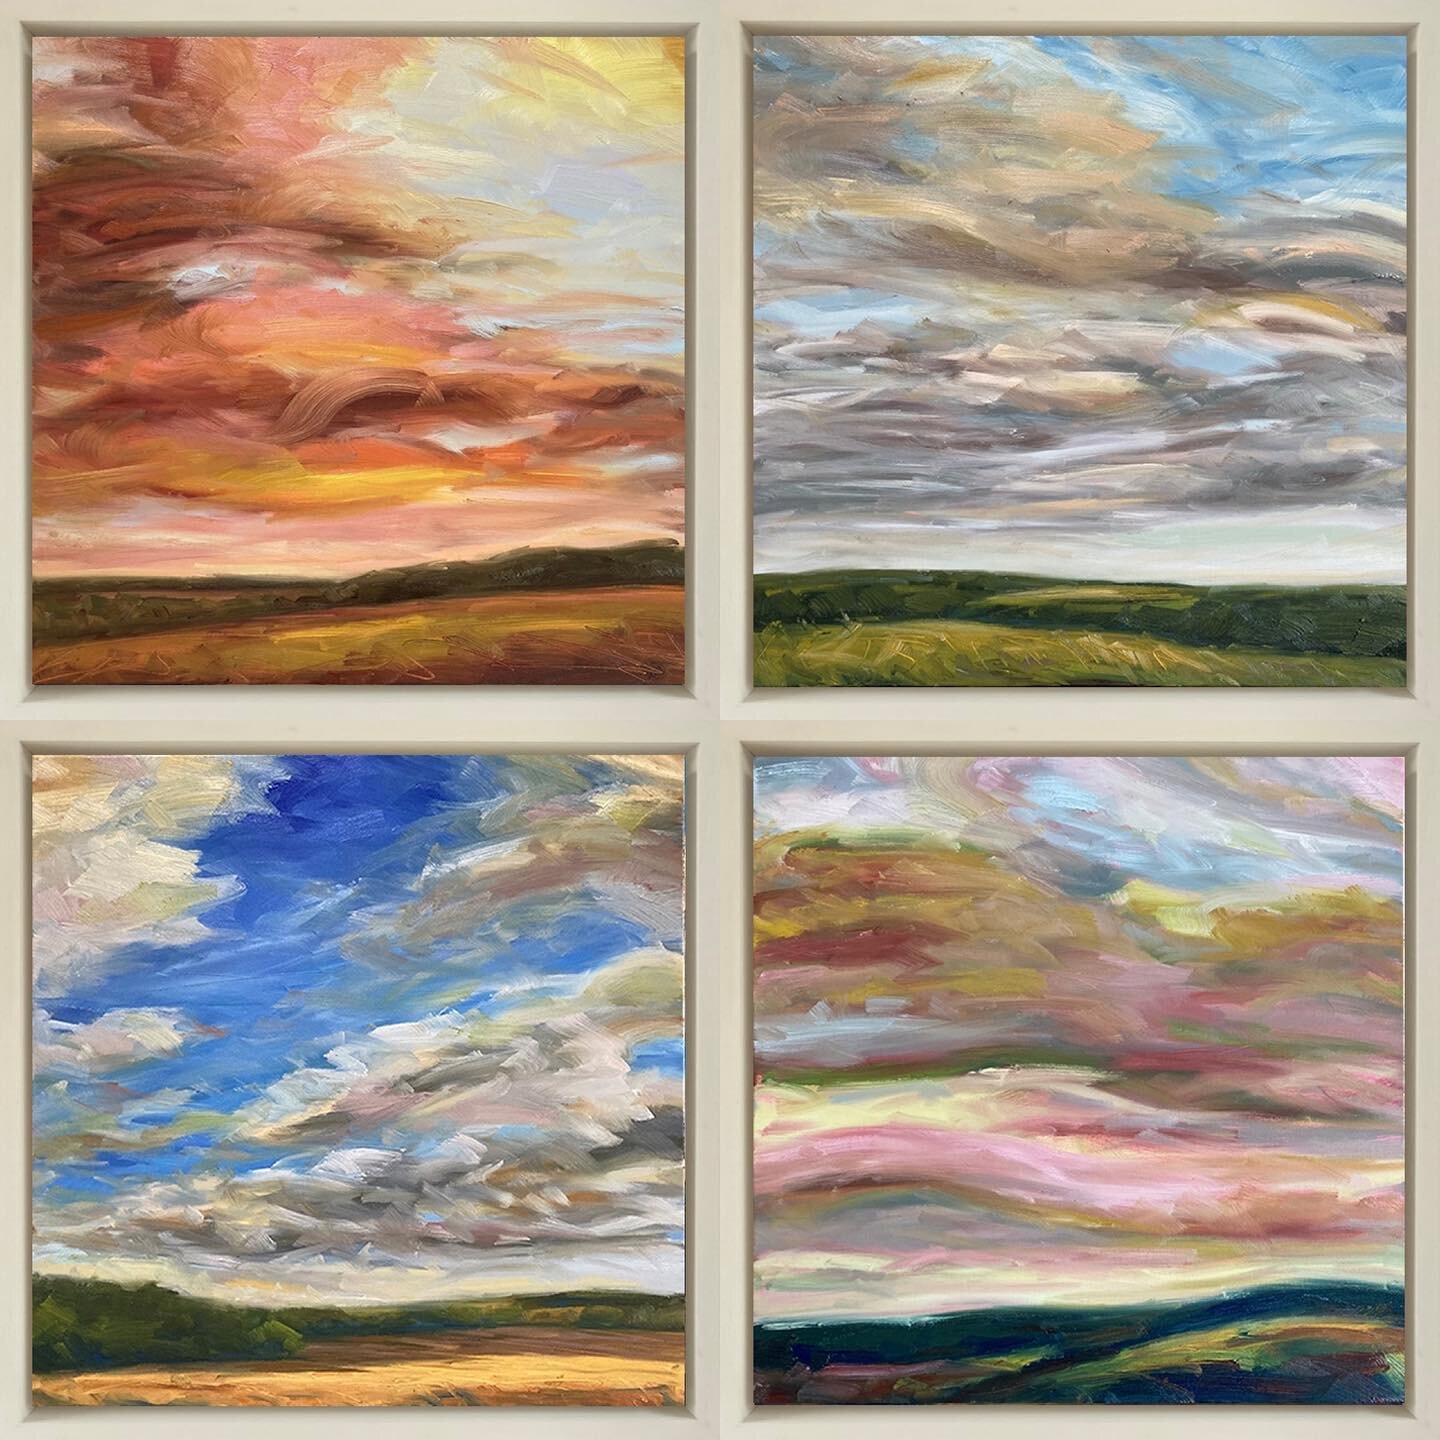 Which of these paintings is your favourite? All are currently available @herberthedleyuk  but not for much longer!

Herbert Hedley is open from 10am-5pm today - Westmark Barns GU31 5AT - do pop in and have a look if you can!